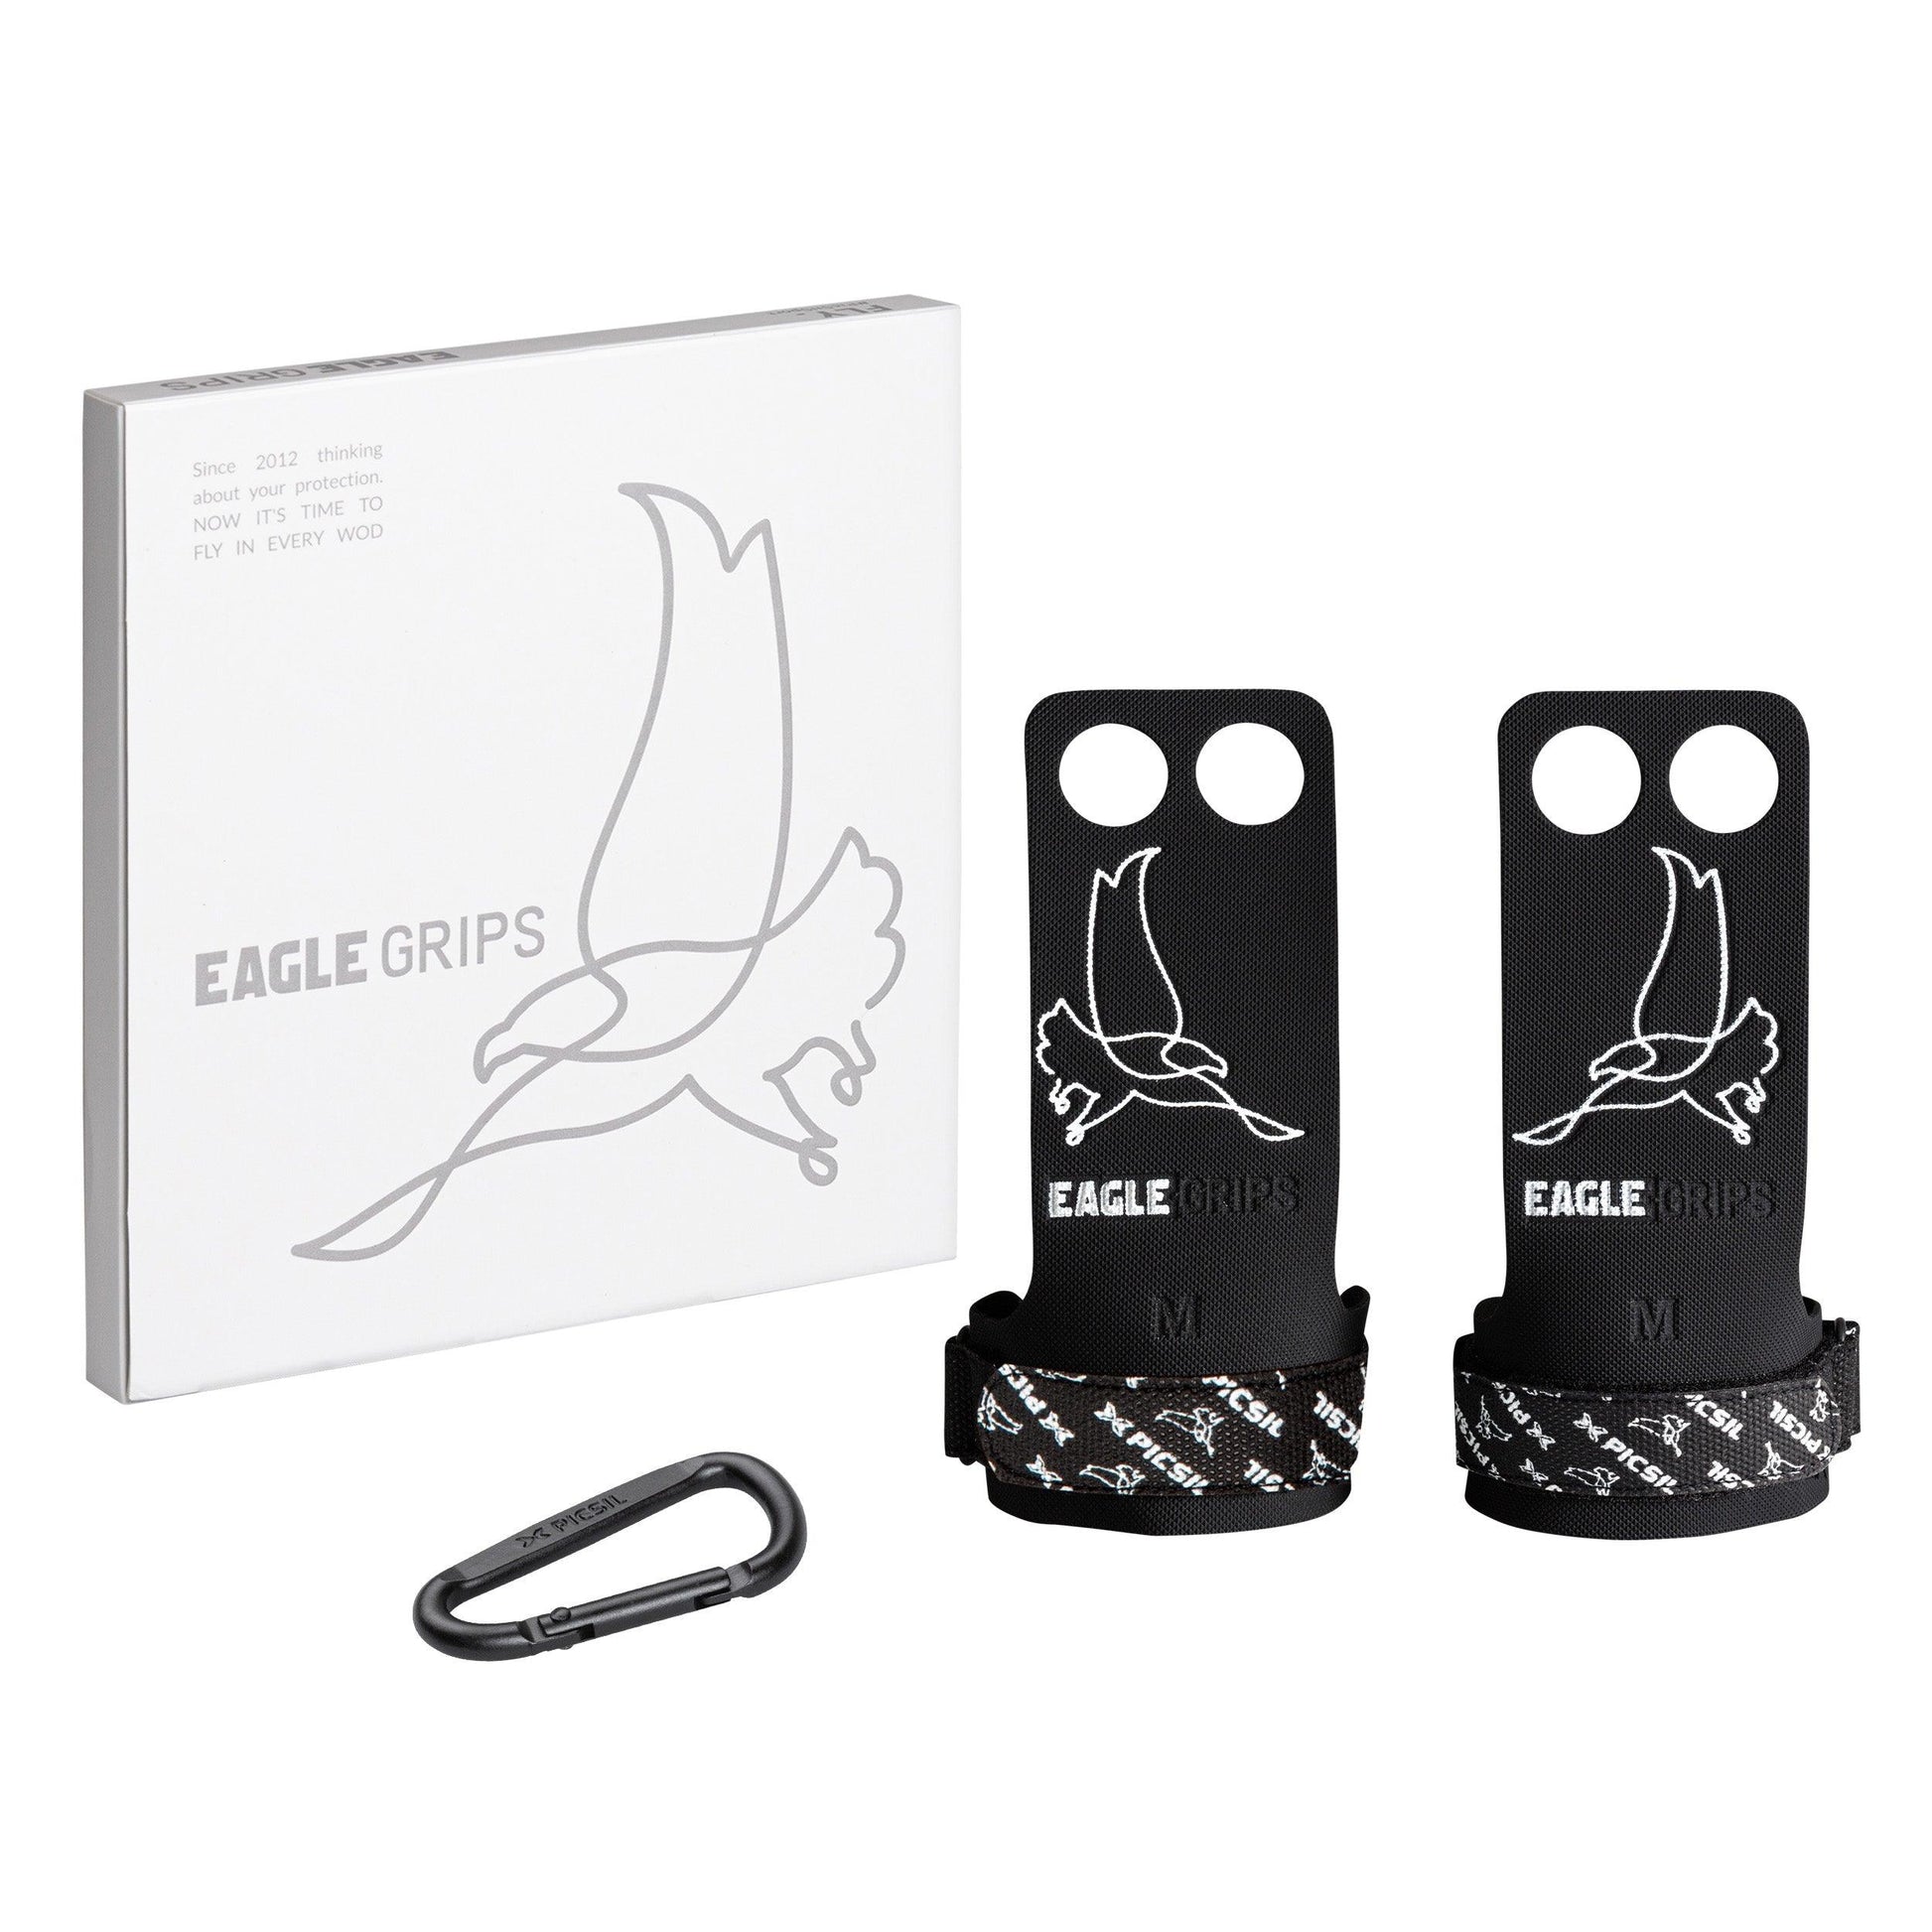 Picsil Eagle Grips 2H Black Packaging